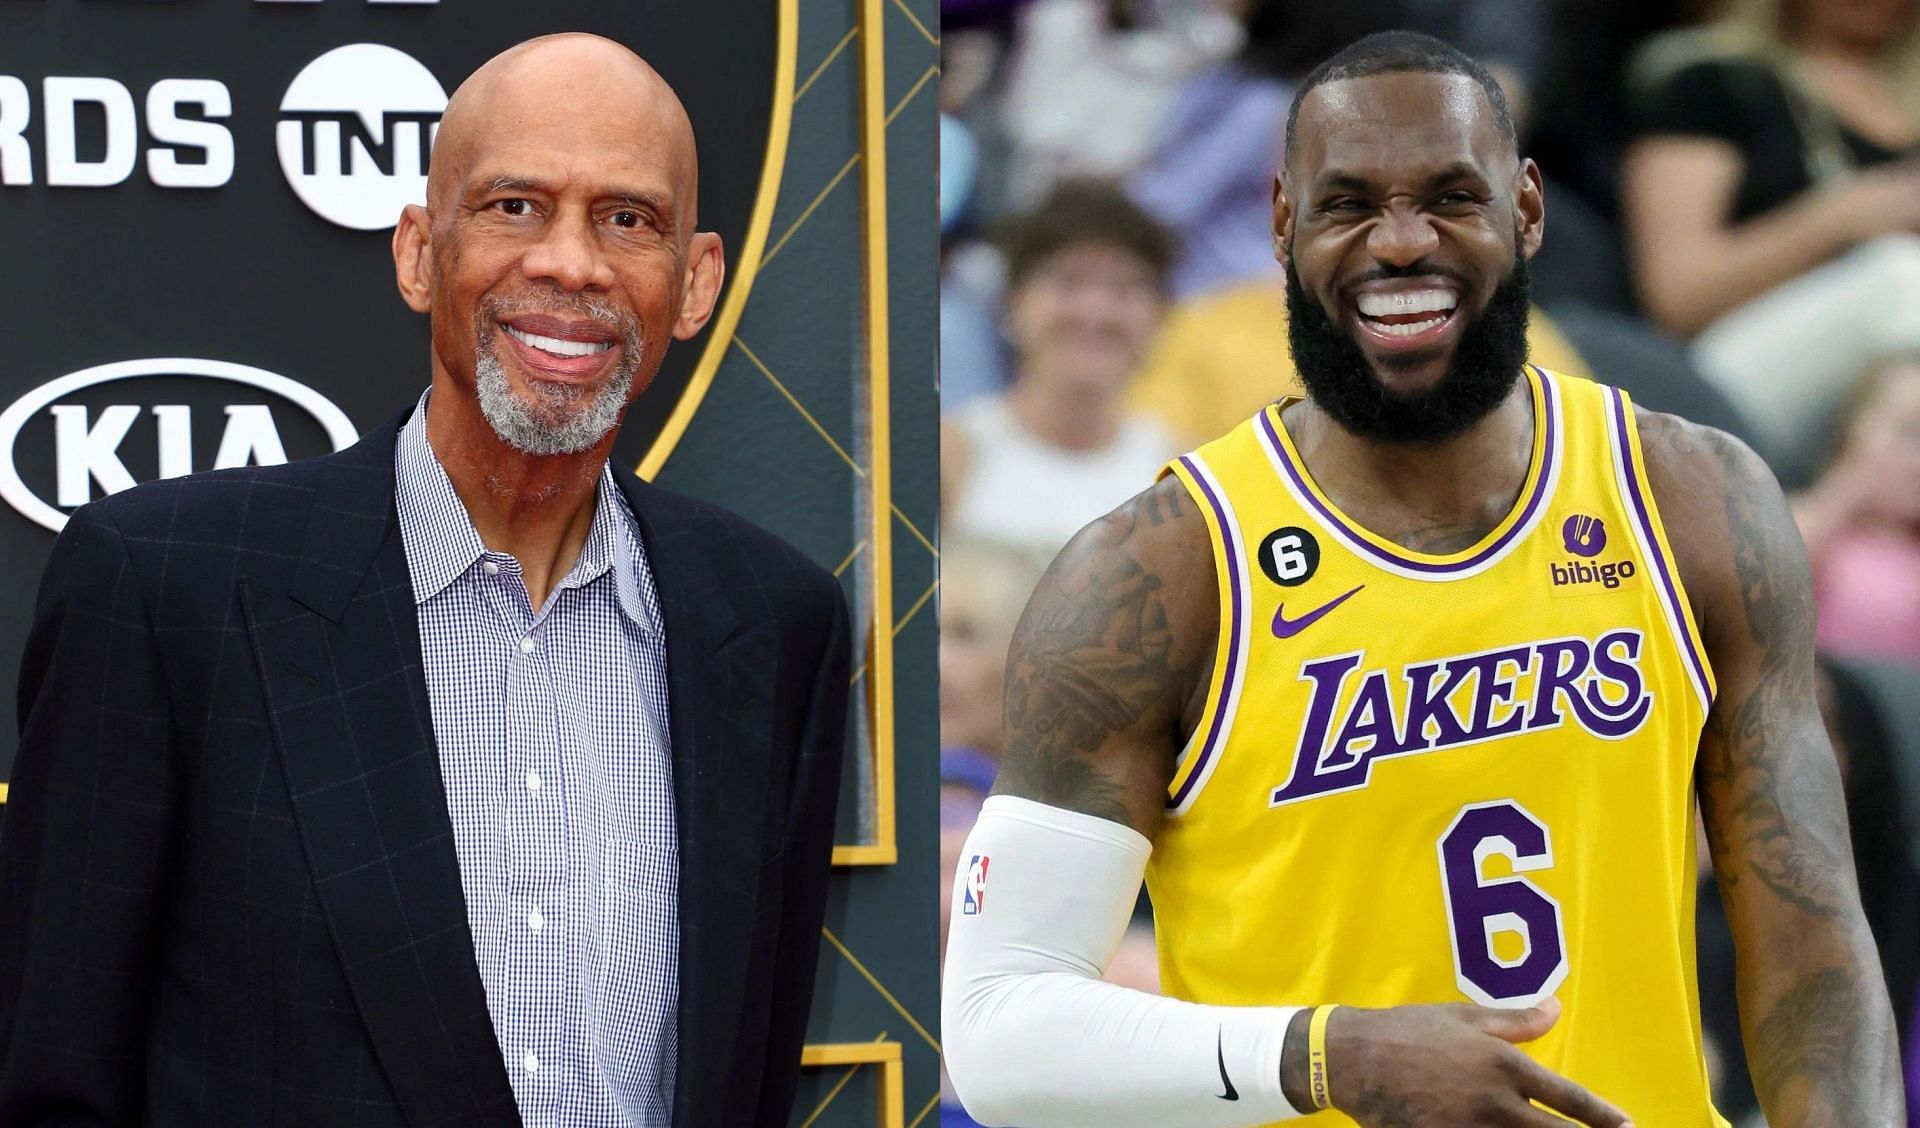 LeBron James grew up idolizing Magic Johnson and is excited to 'partner'  with him on the Lakers - Silver Screen and Roll